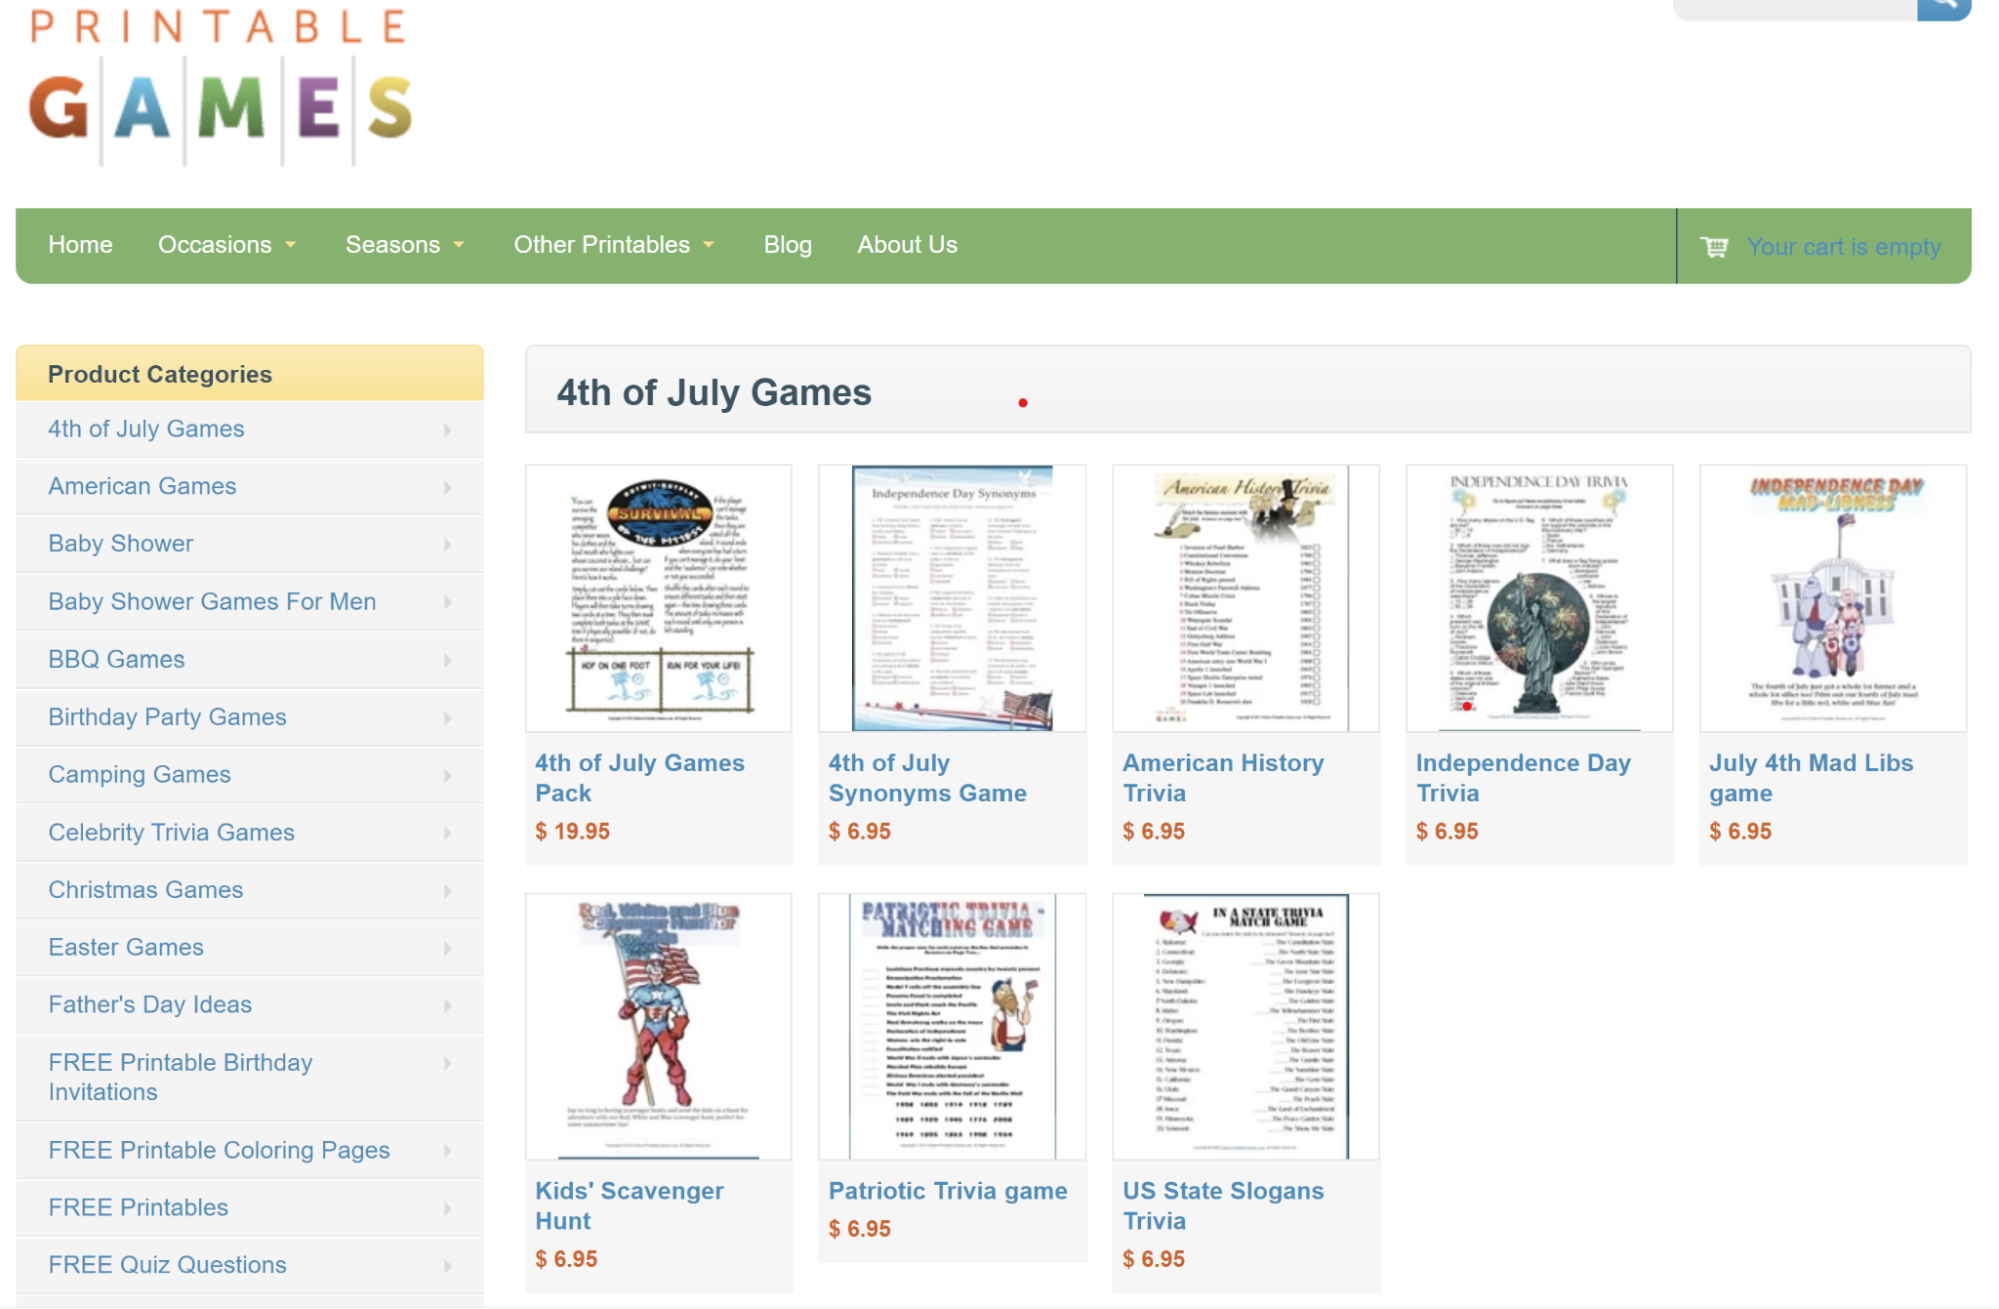 A selection of printable games listed on an ecommerce website